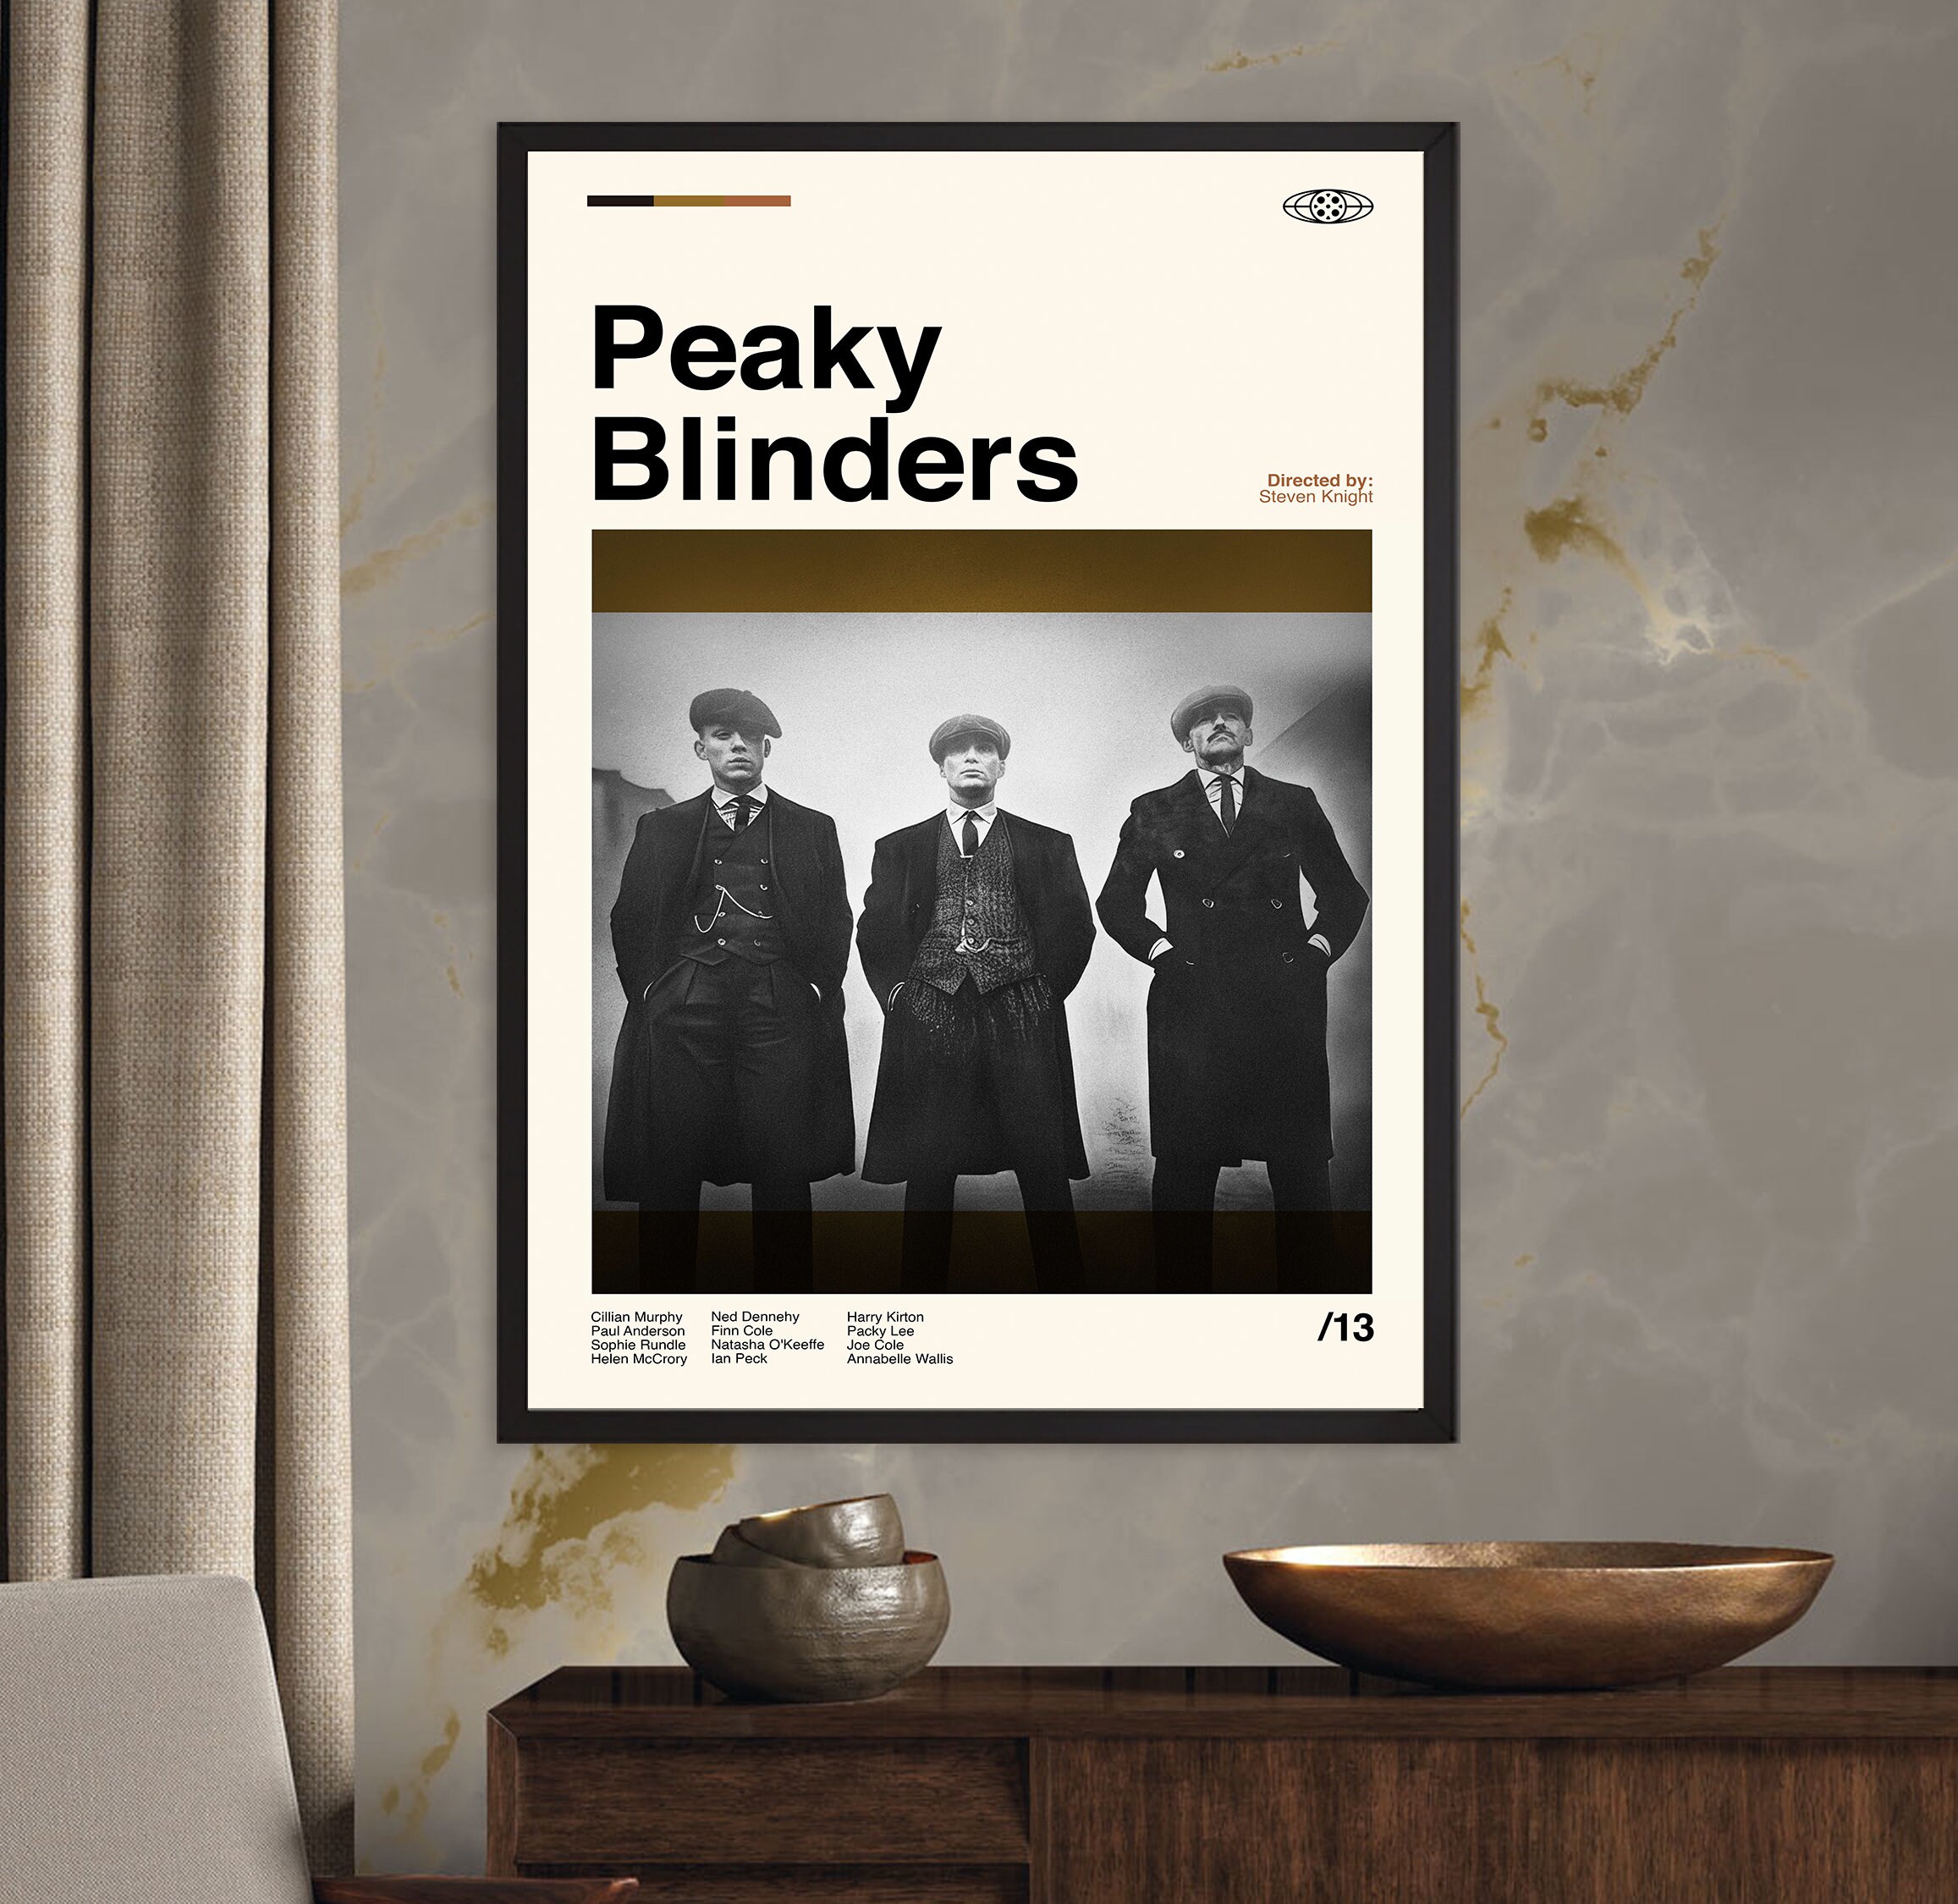 Peaky Blinders Movie Chracter Cilian Murphy Wall Art Home Decor - POSTER  20x30